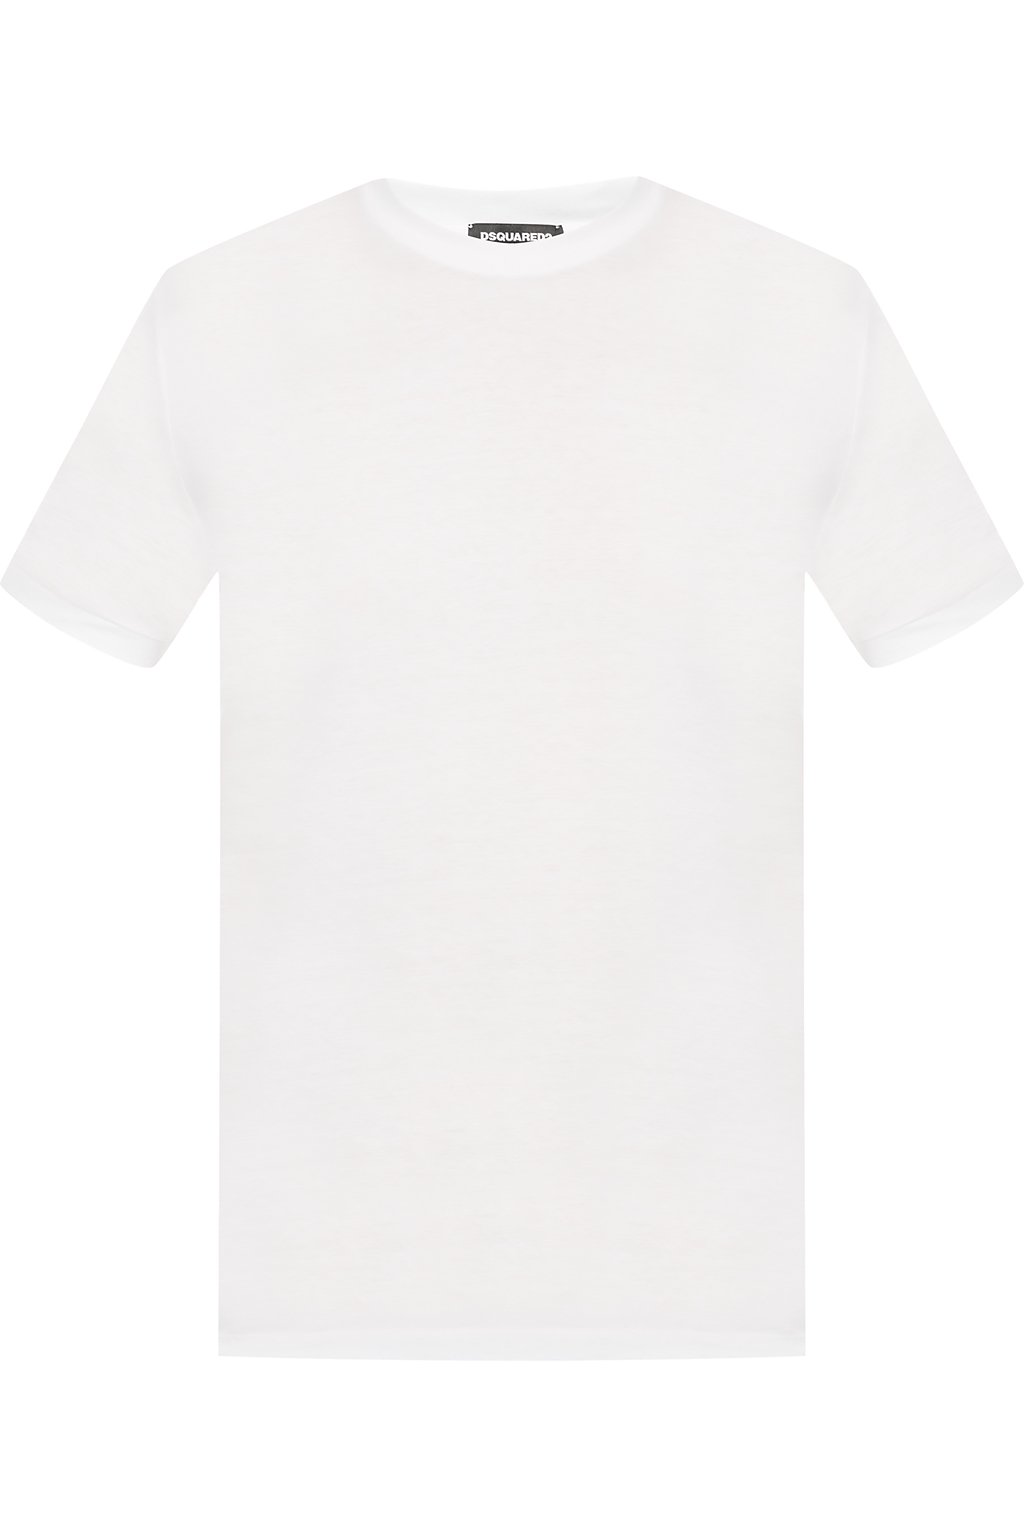 dsquared2 round neck t shirt grey